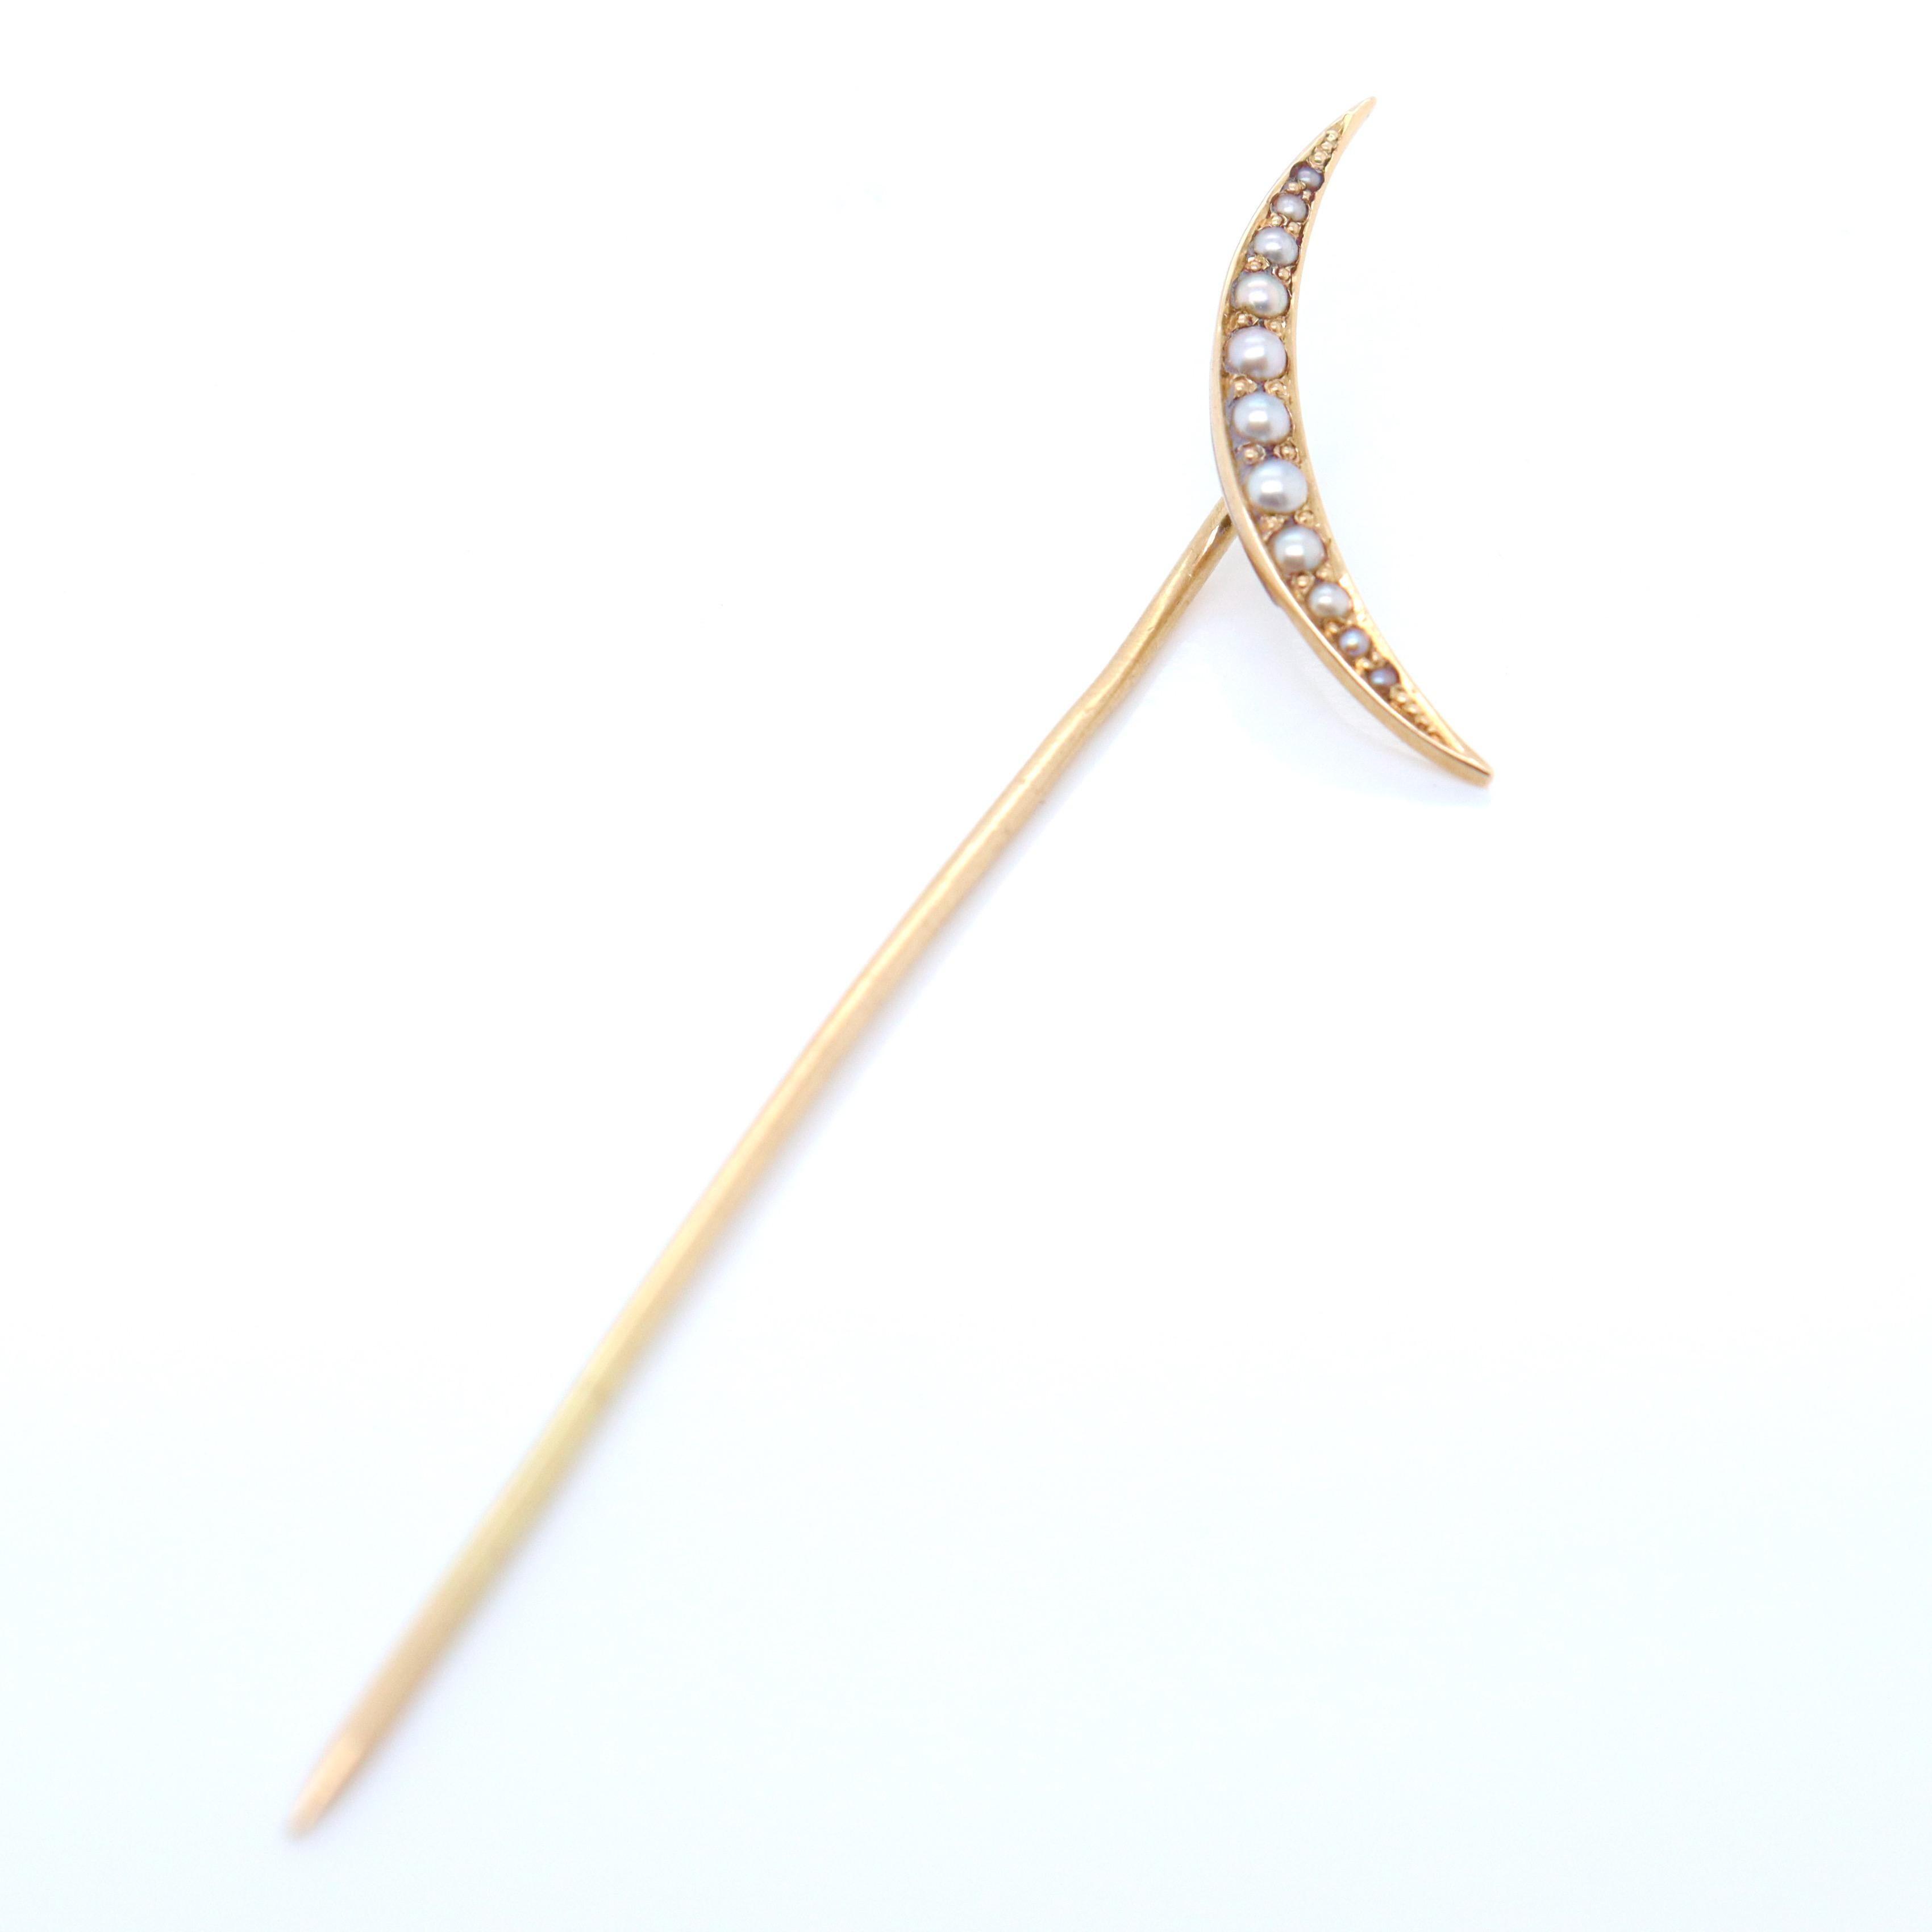 Antique 14k Gold & Seed Pearl Crescent Moon Stick Pin For Sale 2